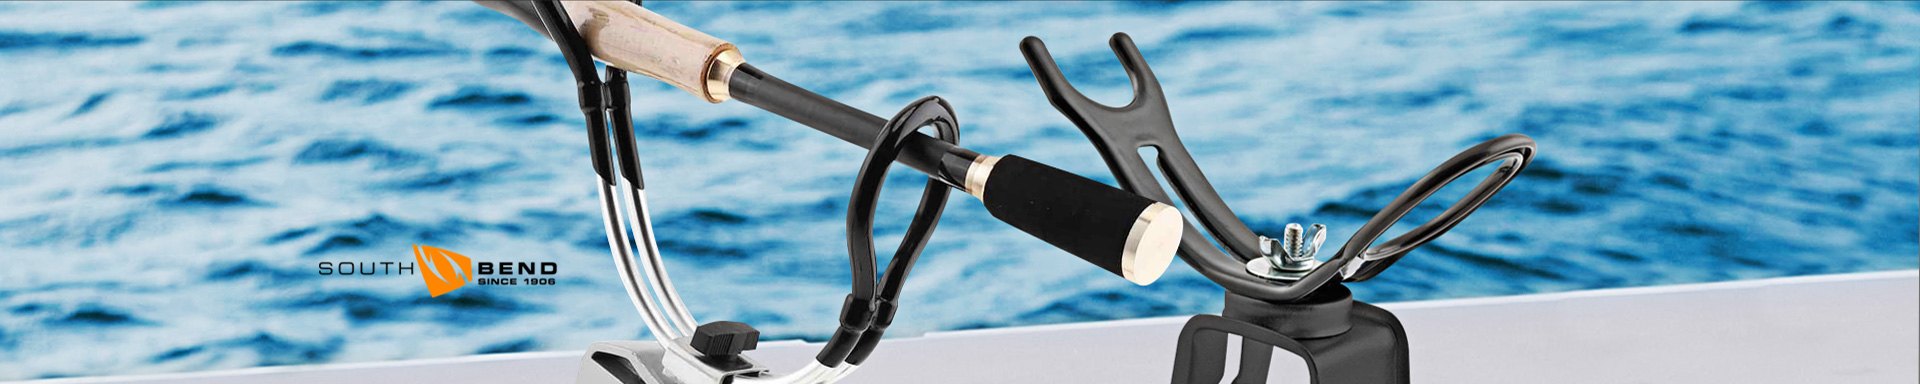 South Bend Fishing Rod & Reel Combos